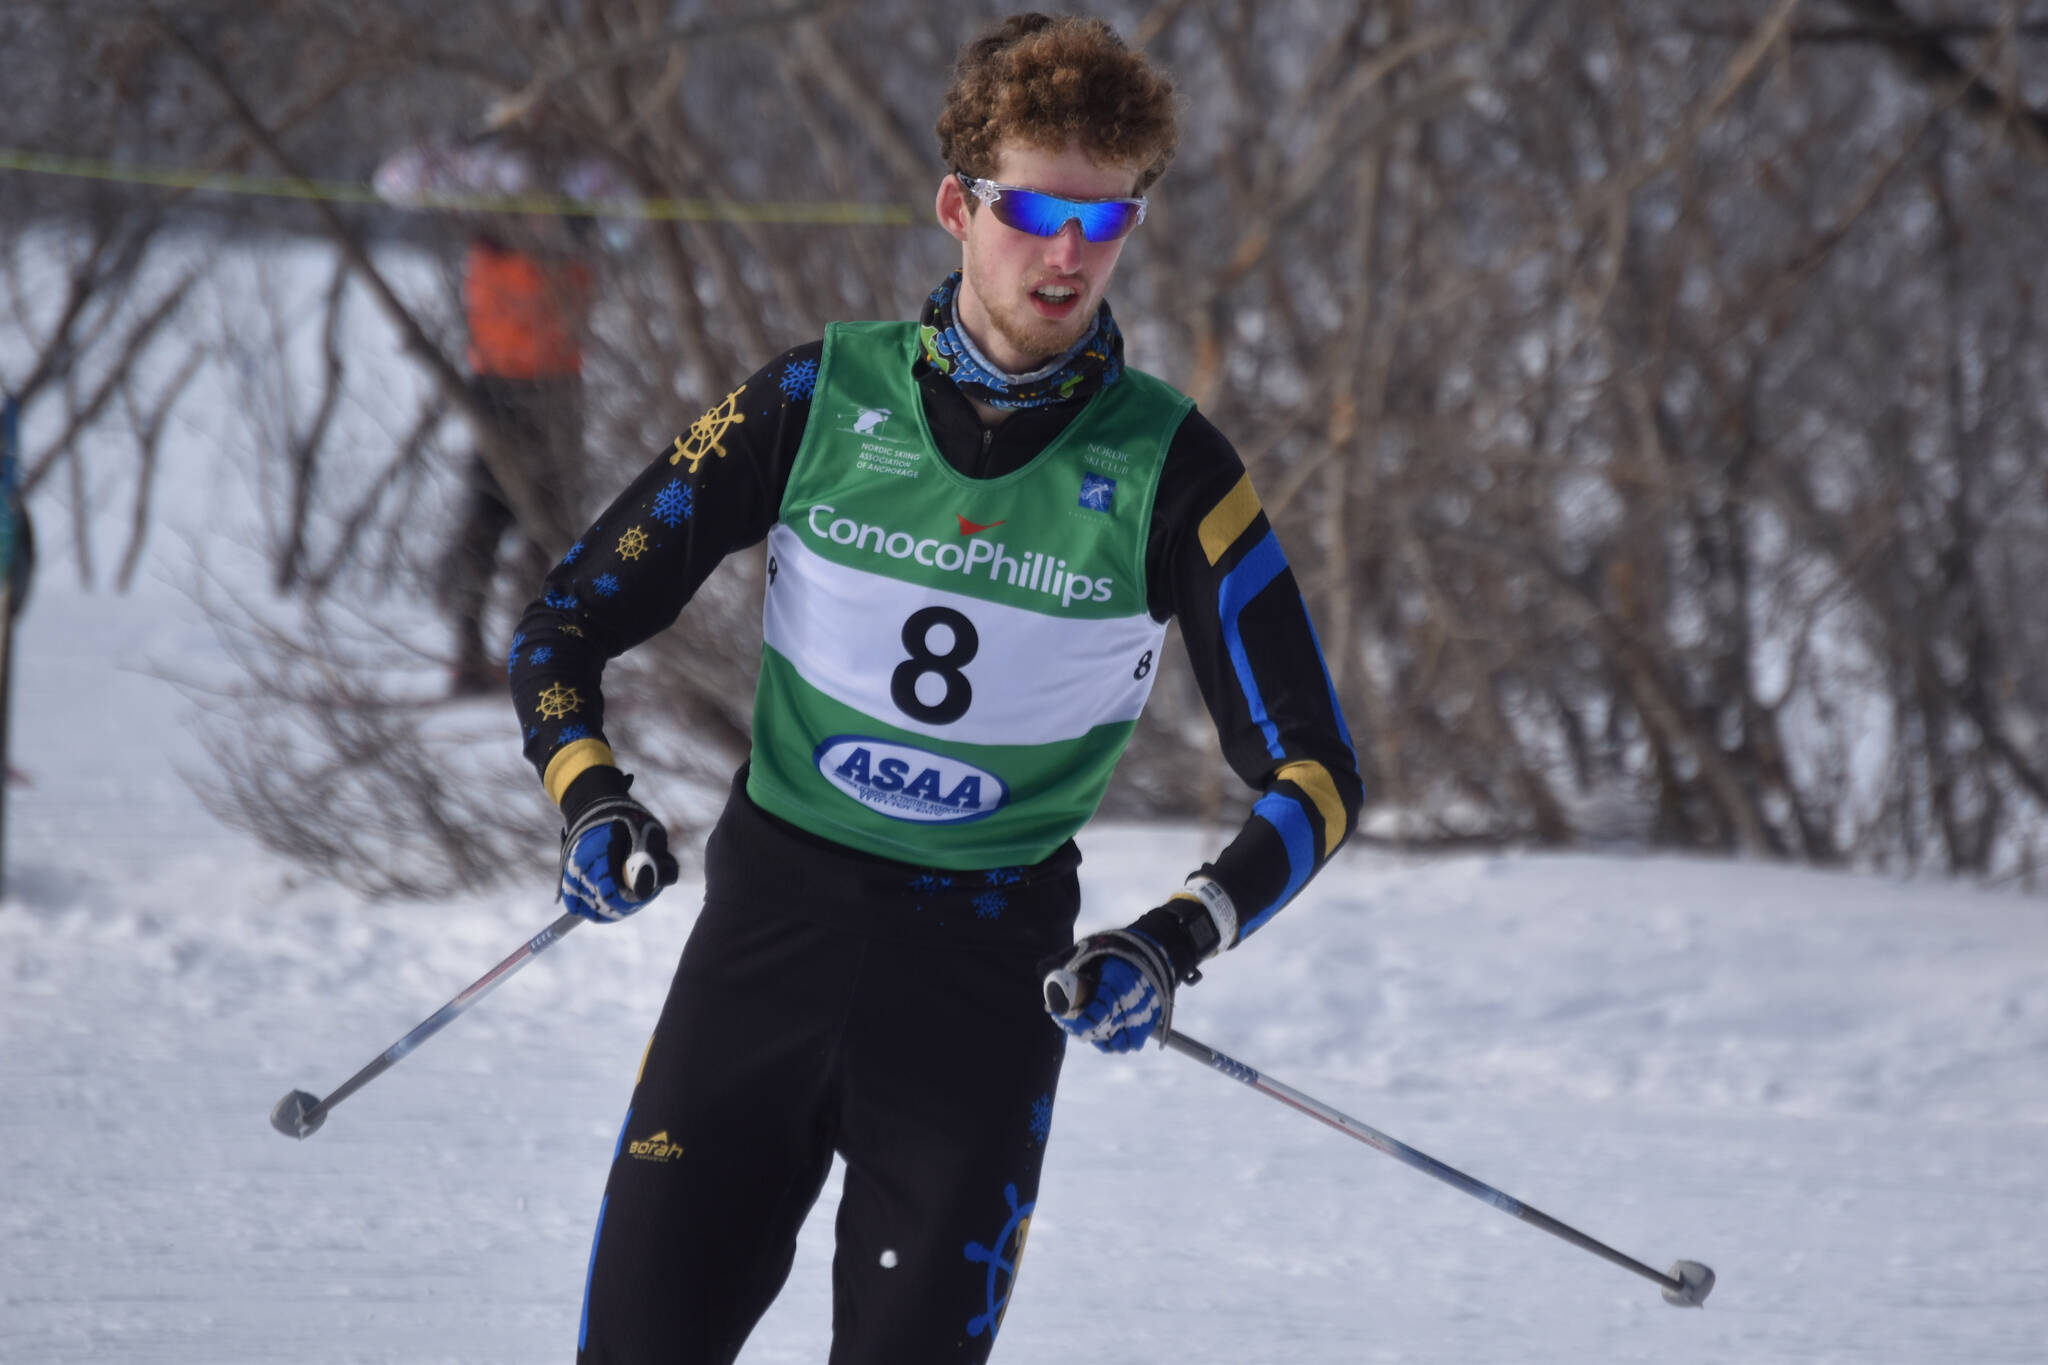 Seamus McDonough, of Homer, rounds a bend during the boys 4x5-kilometer relay at the ASAA State Nordic Ski Championships at Kincaid Park in Anchorage, Alaska, on Saturday, Feb. 25, 2023. (Jake Dye/Peninsula Clarion)